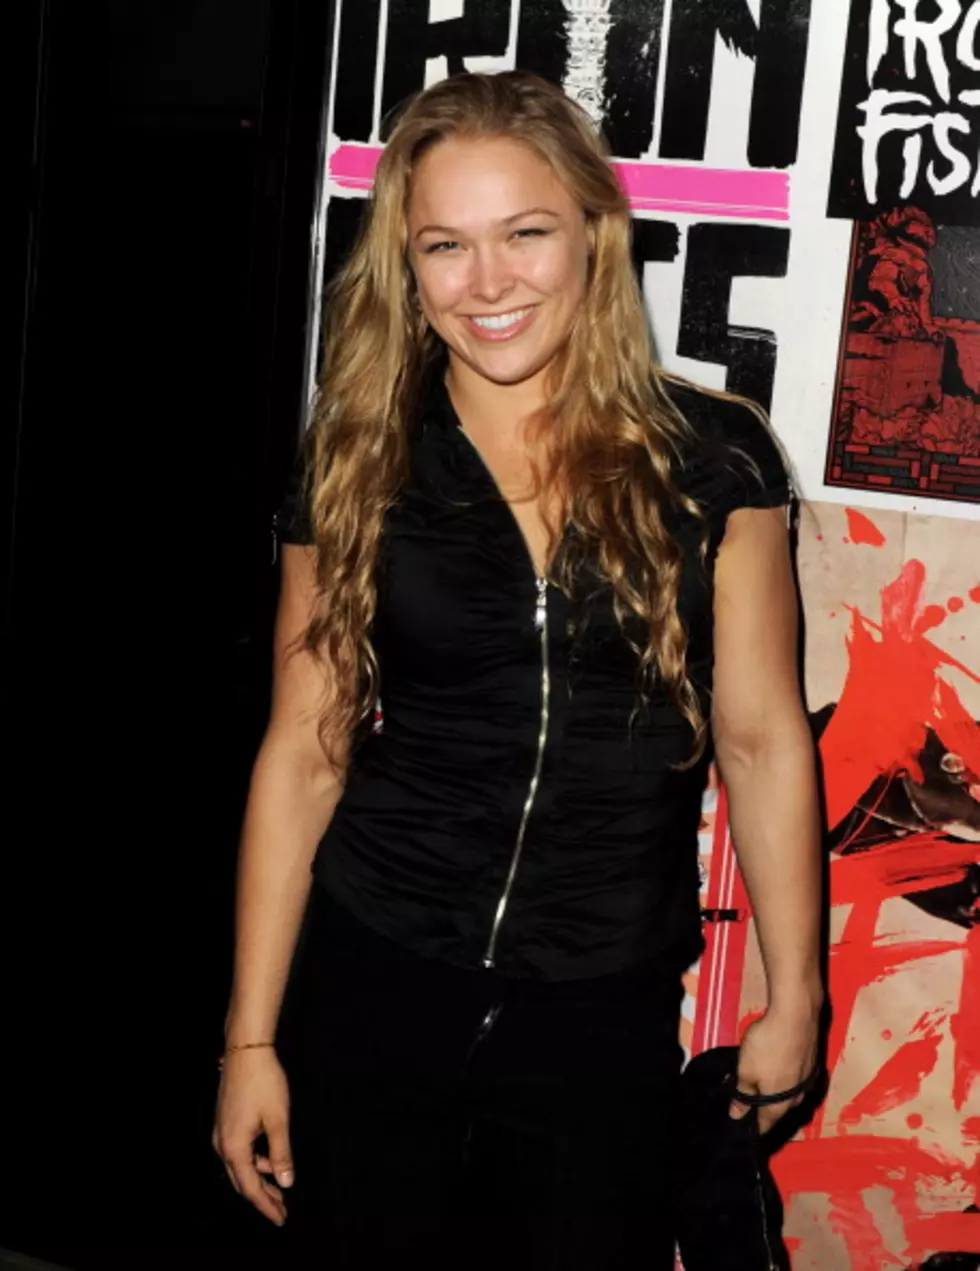 MMA Fighter Ronda Rousey Won’t Pose For Playboy